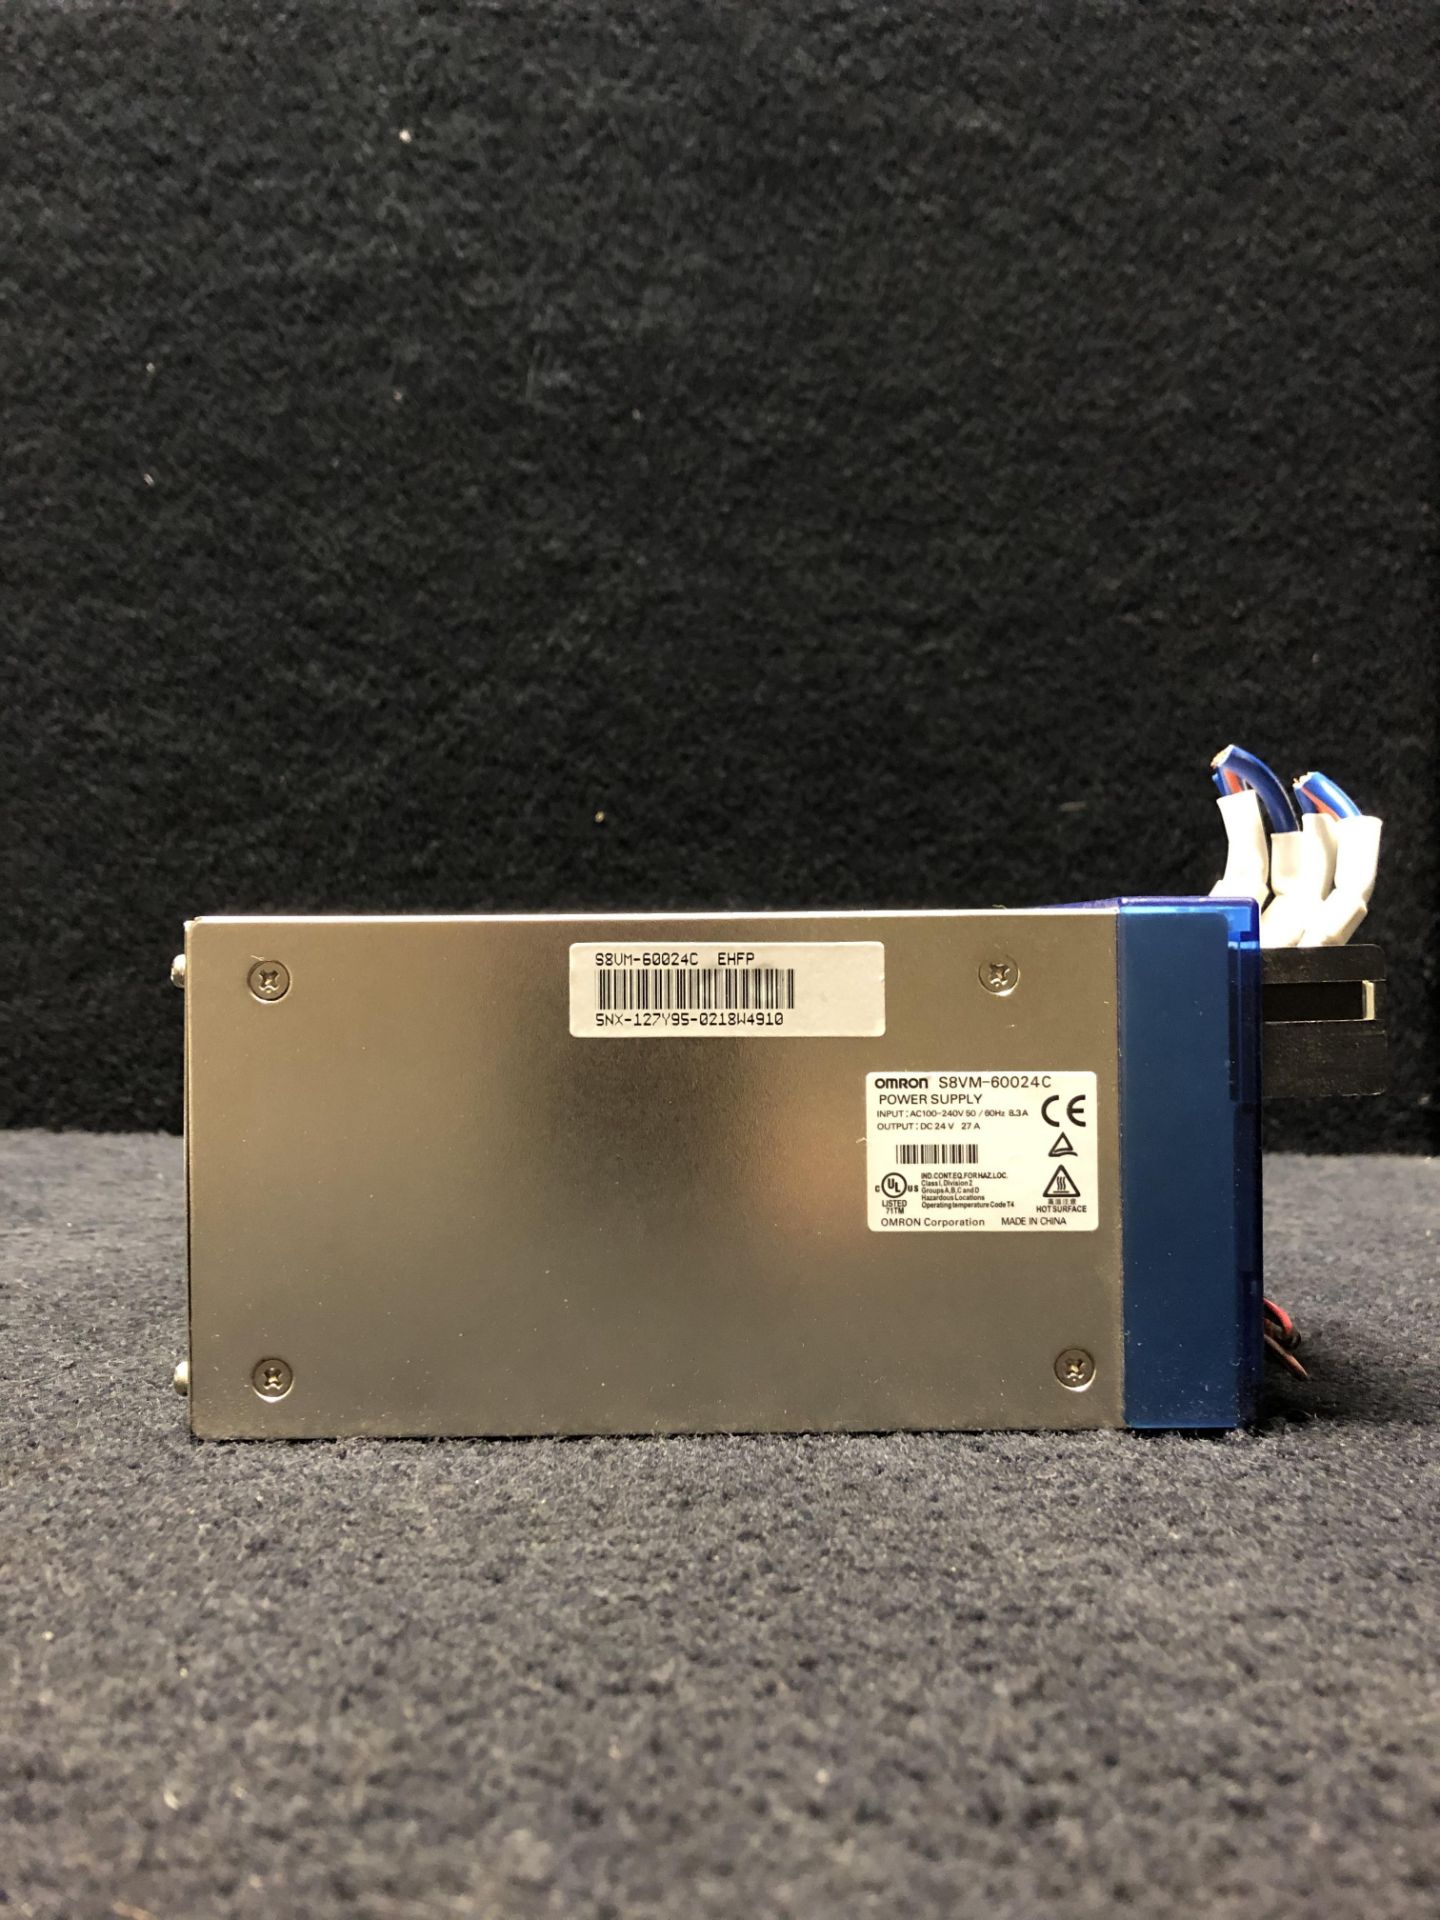 LOT OF 2 - OMRON S8VM-60024C POWER SUPPLY INPUT: 100/240 VAC OUTPUT: 8.3A 24VDC, 50/60Hz - Image 3 of 6